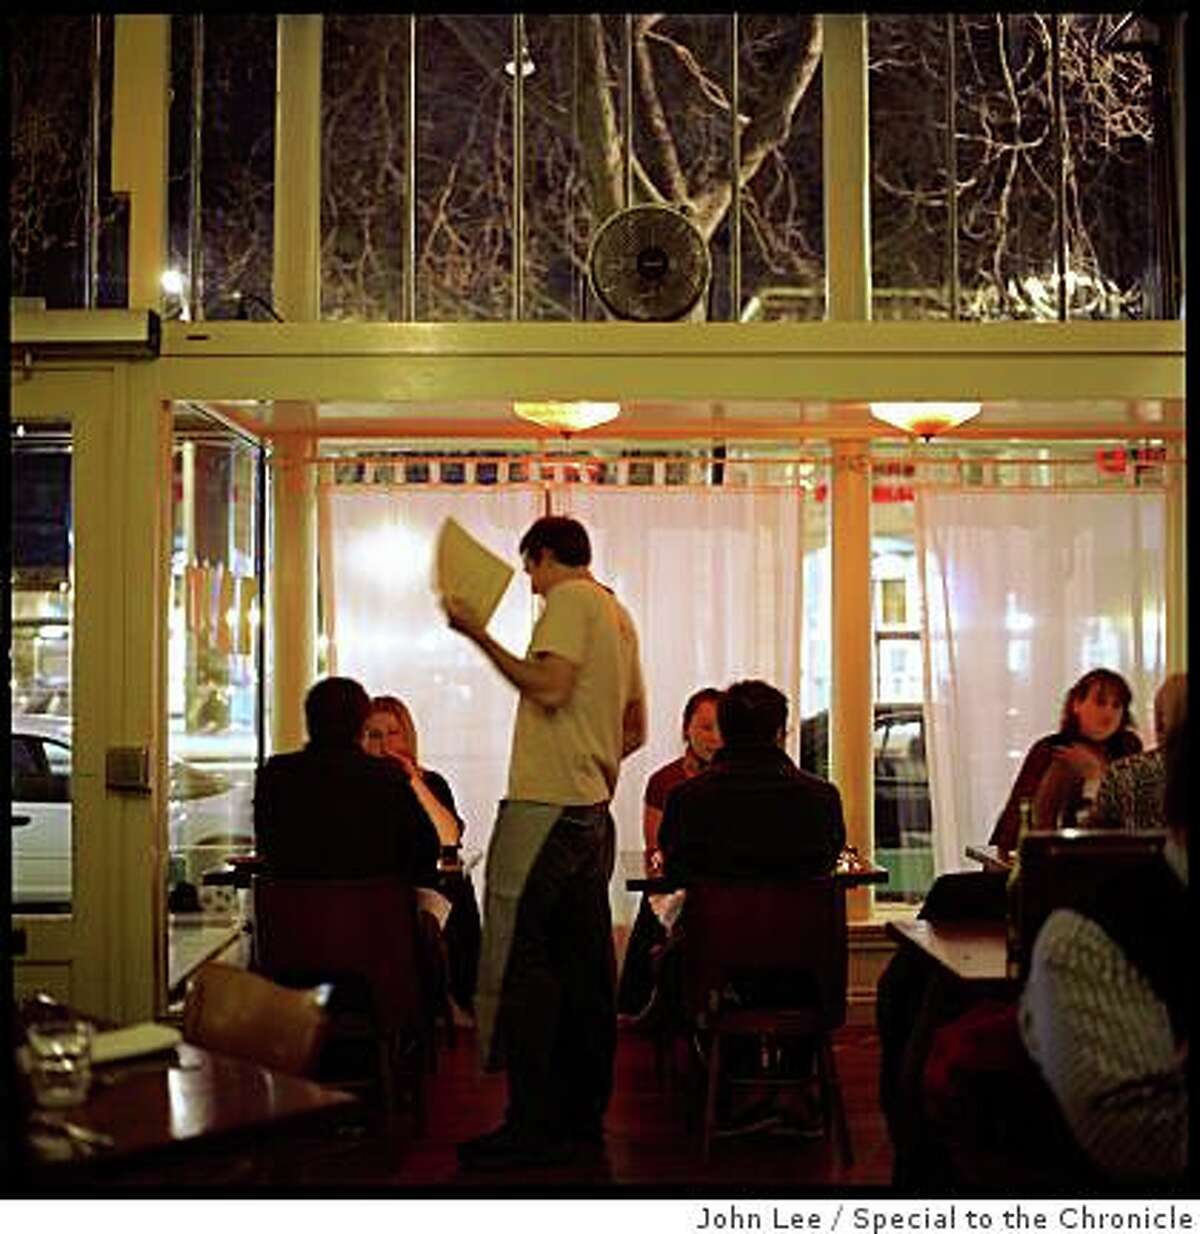 A server waits on diners in the main dining room of Pizzaiolo in Oakland.